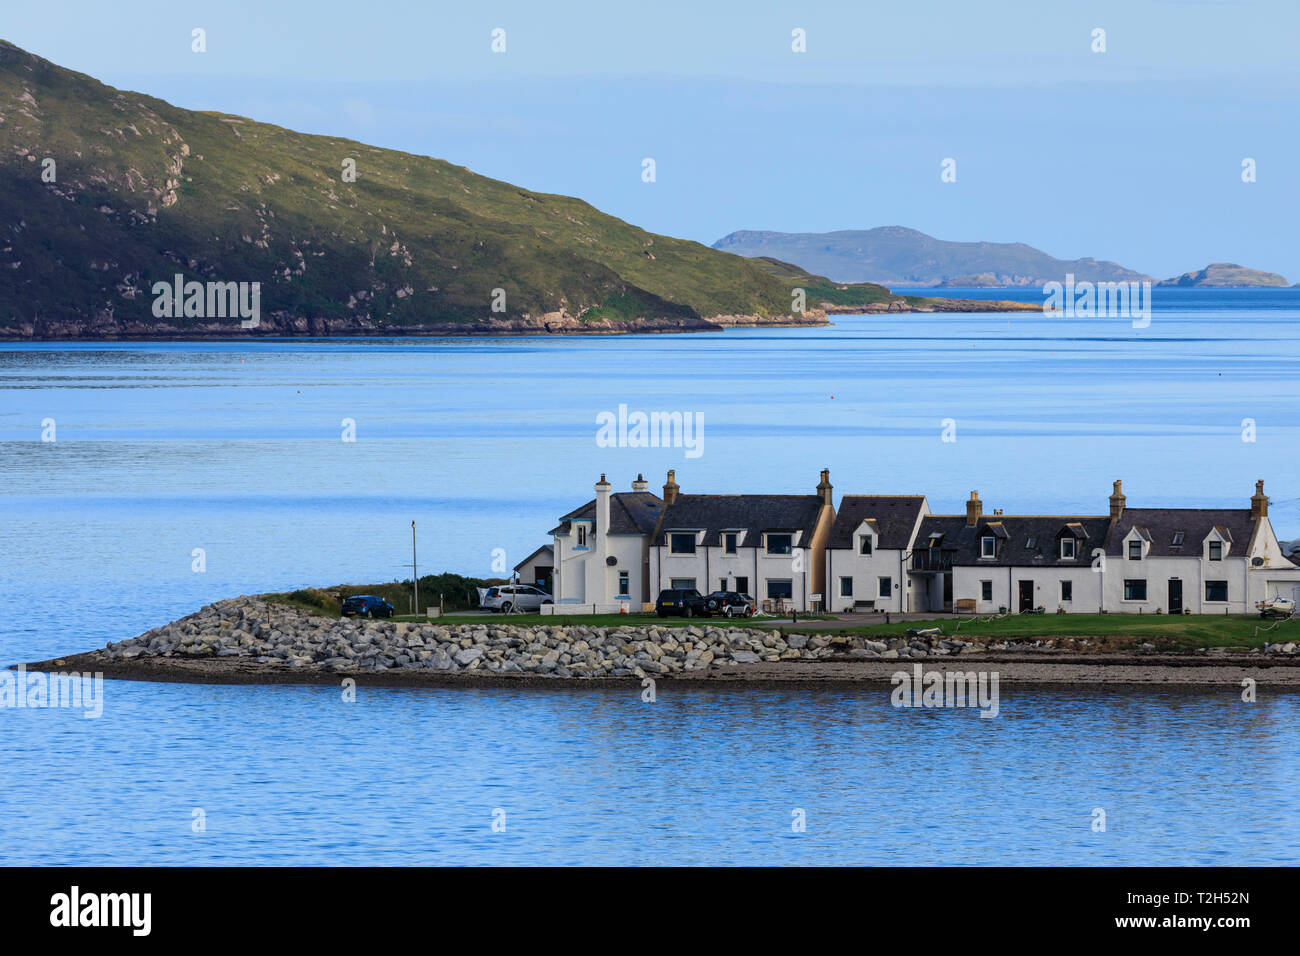 Cottages by Loch Broom in Ullapool, Scotland, Europe Stock Photo